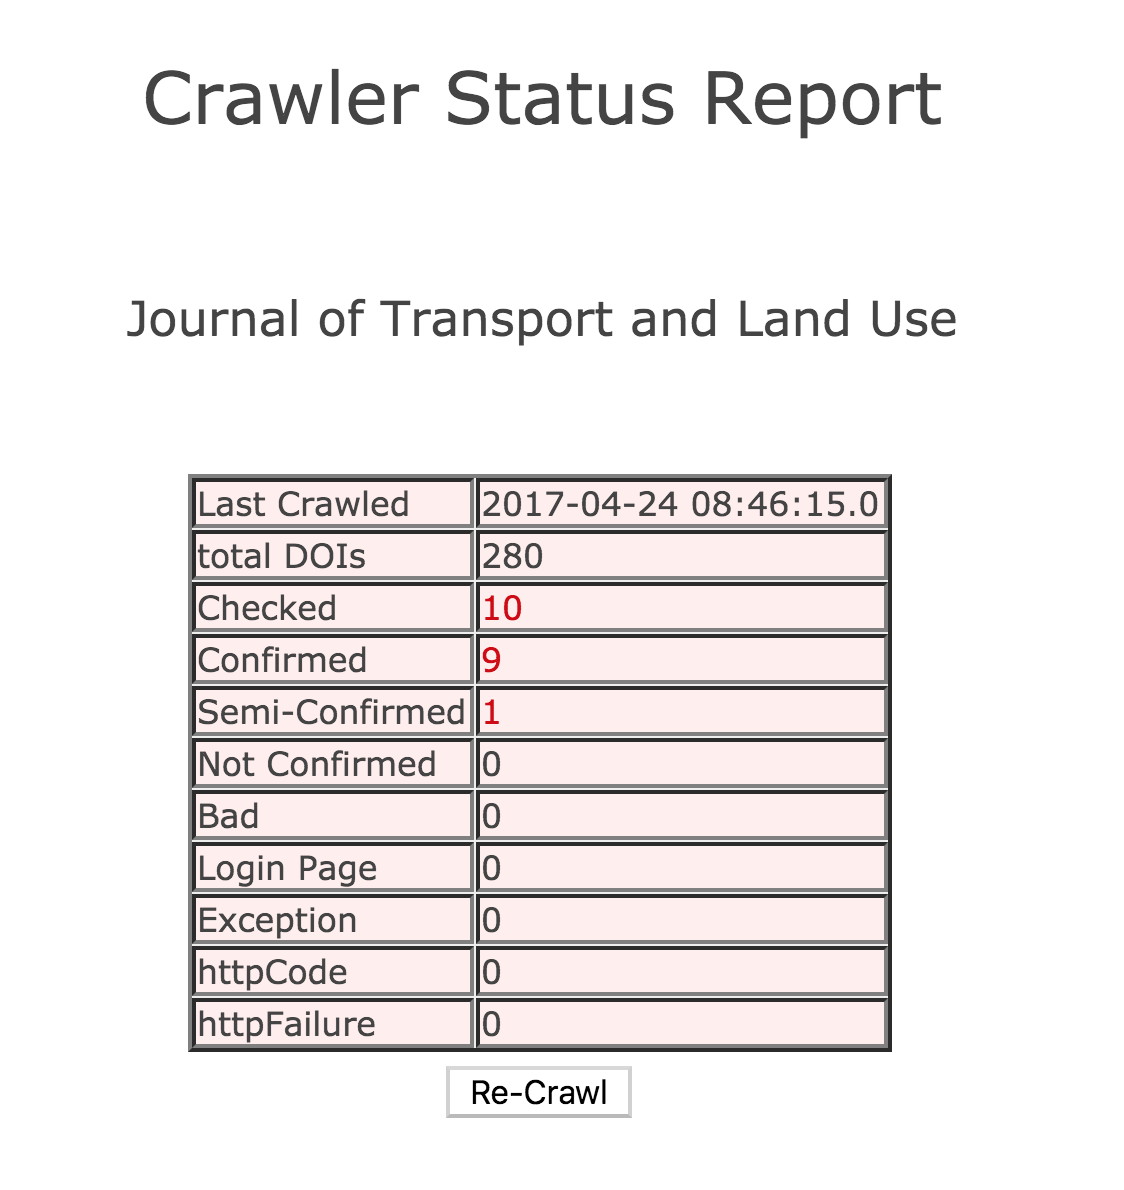 Crawler status report for a title